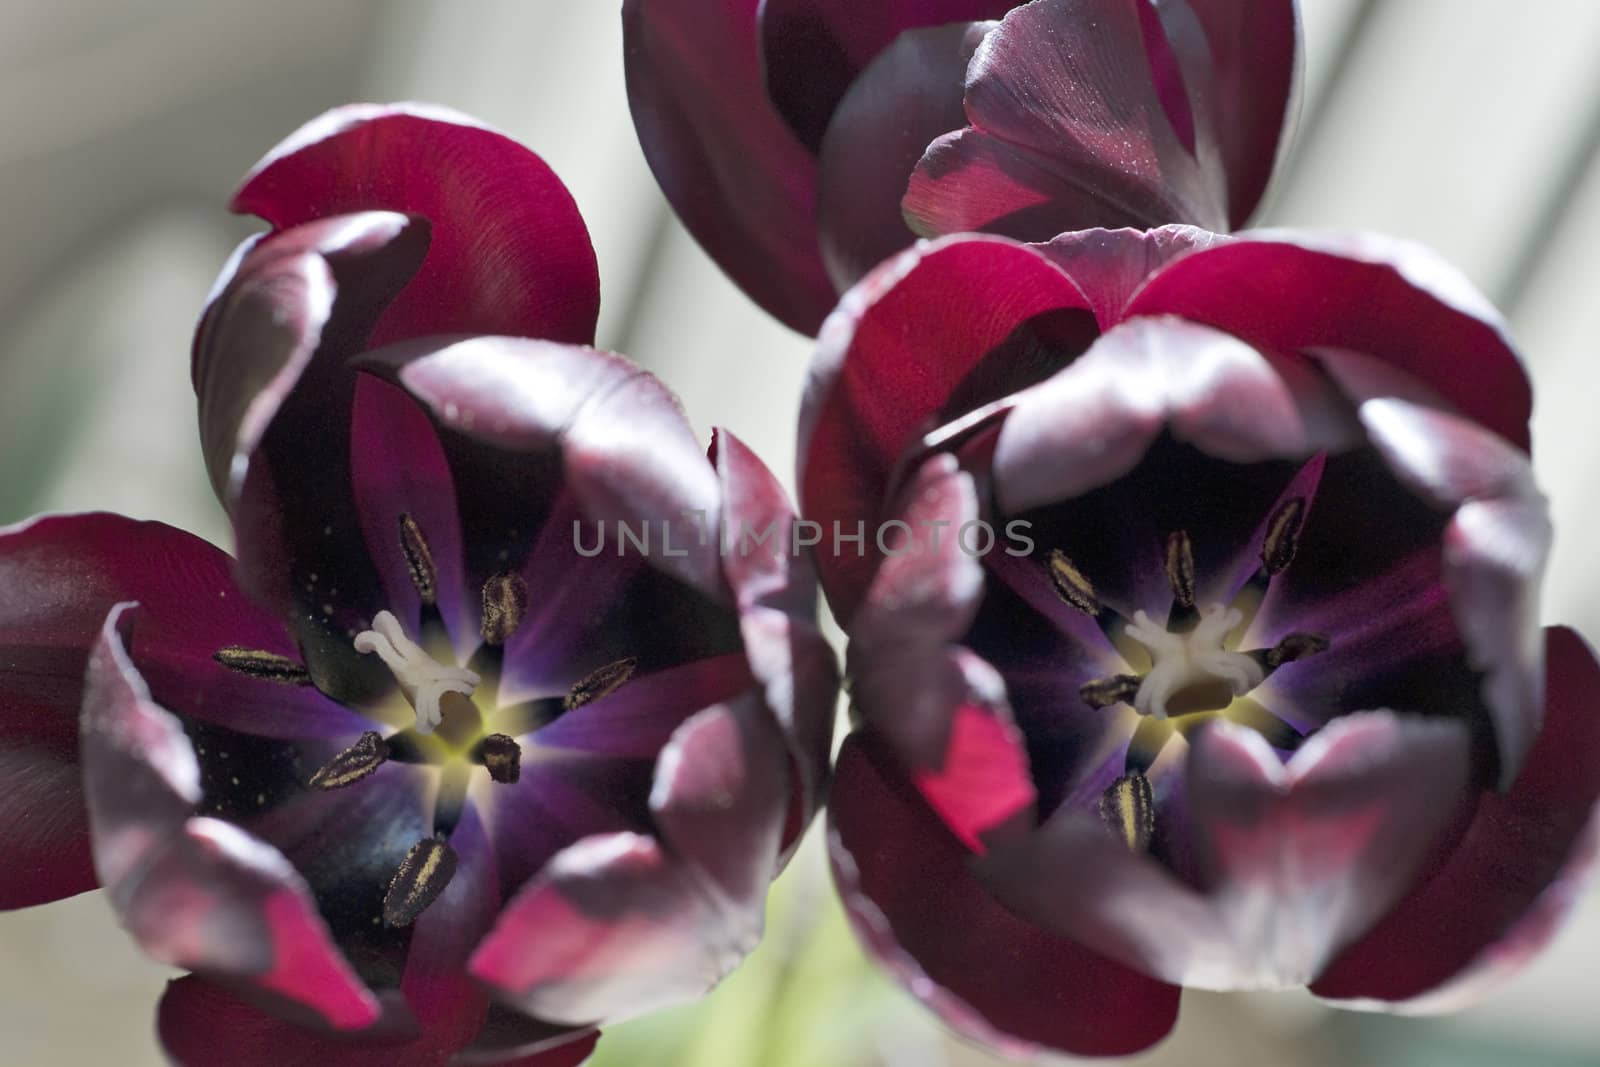 Dark tulips with pistils and stamens close up